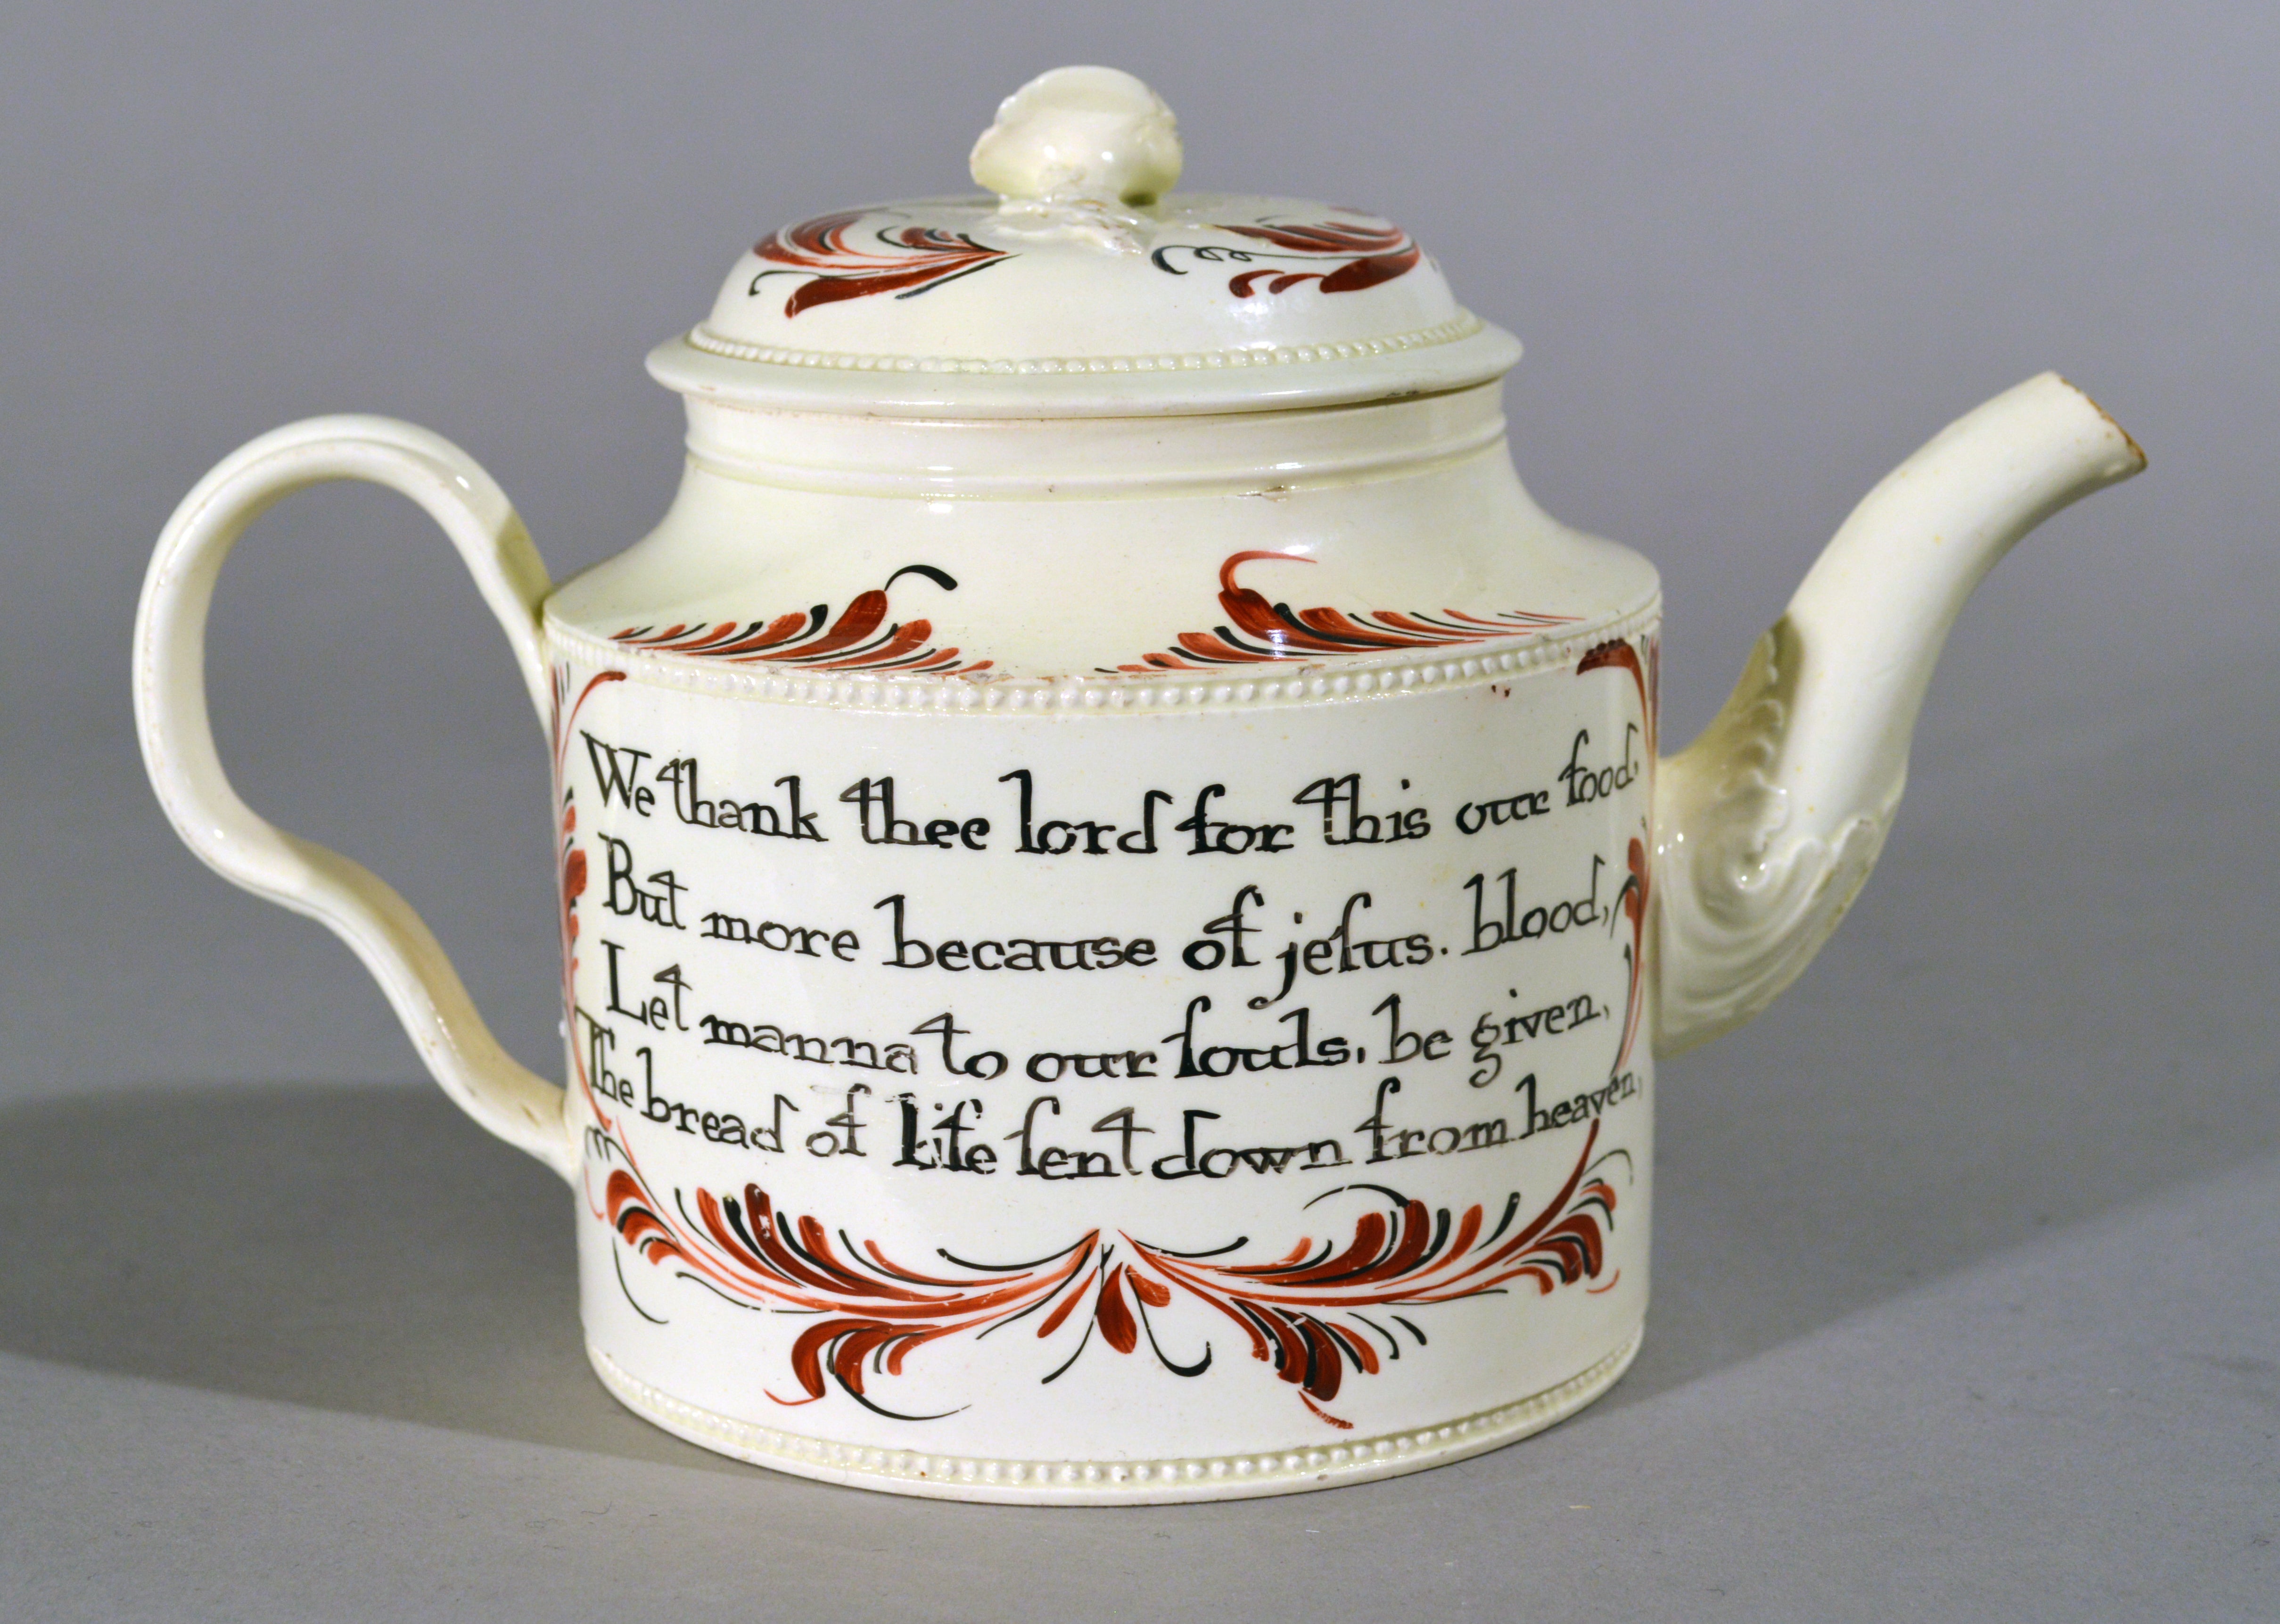 A Rare 18th Century English Creamware Teapot Inscribed with Prayers of Grace